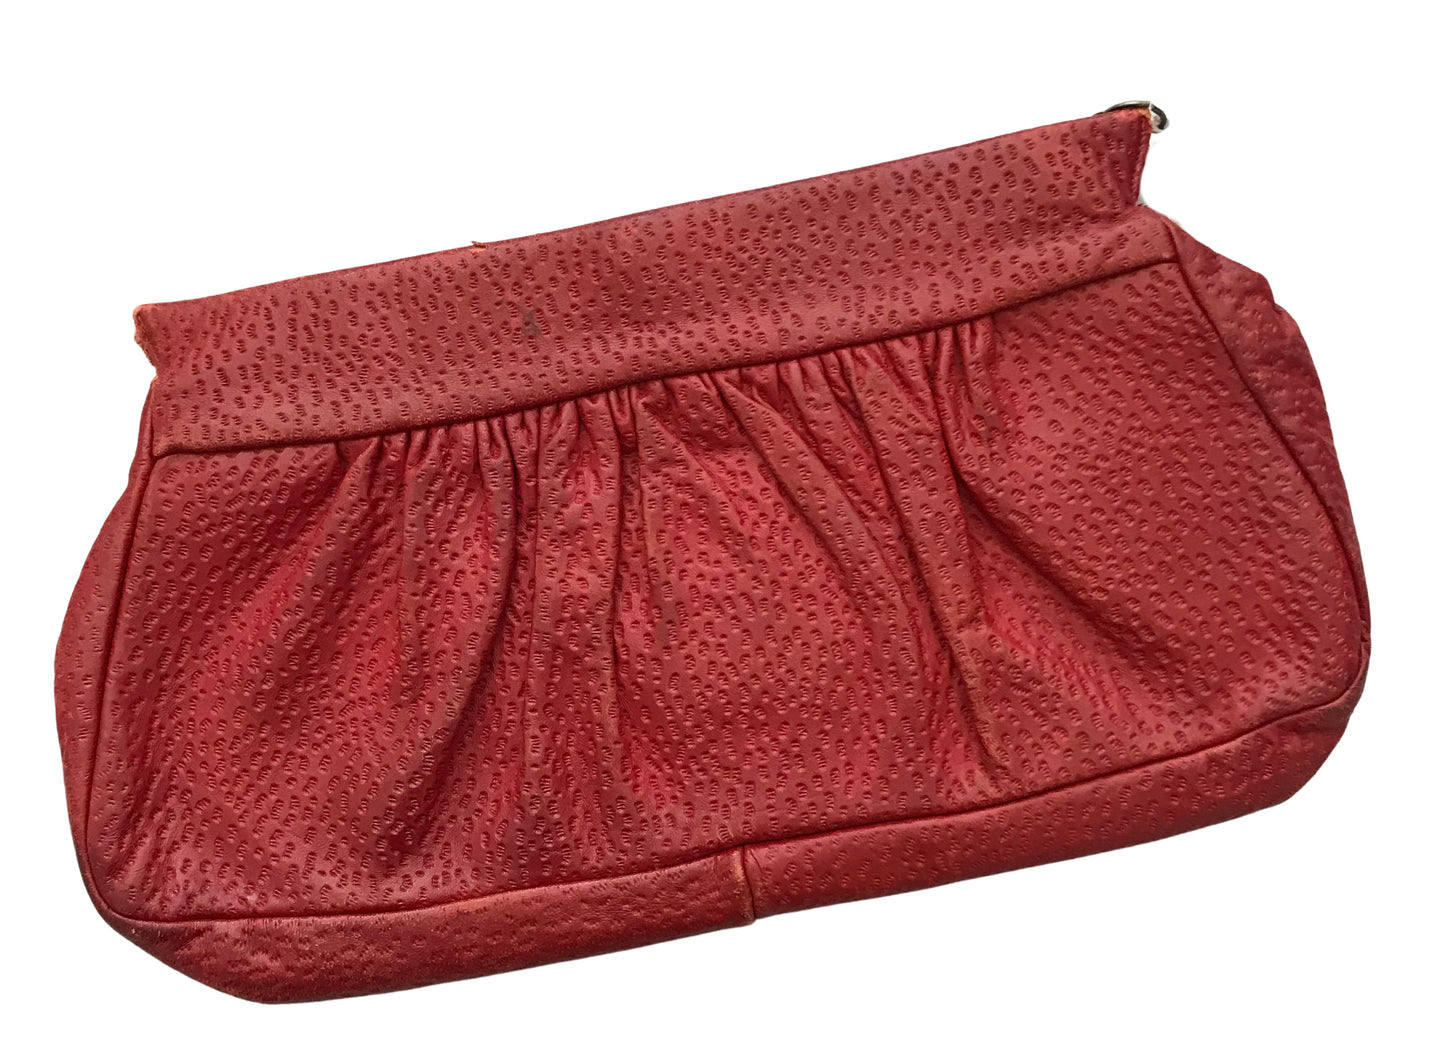 Cherry Red Leather Zip Top Clutch Handbag with Lucite Zipper Pull circa 1940s